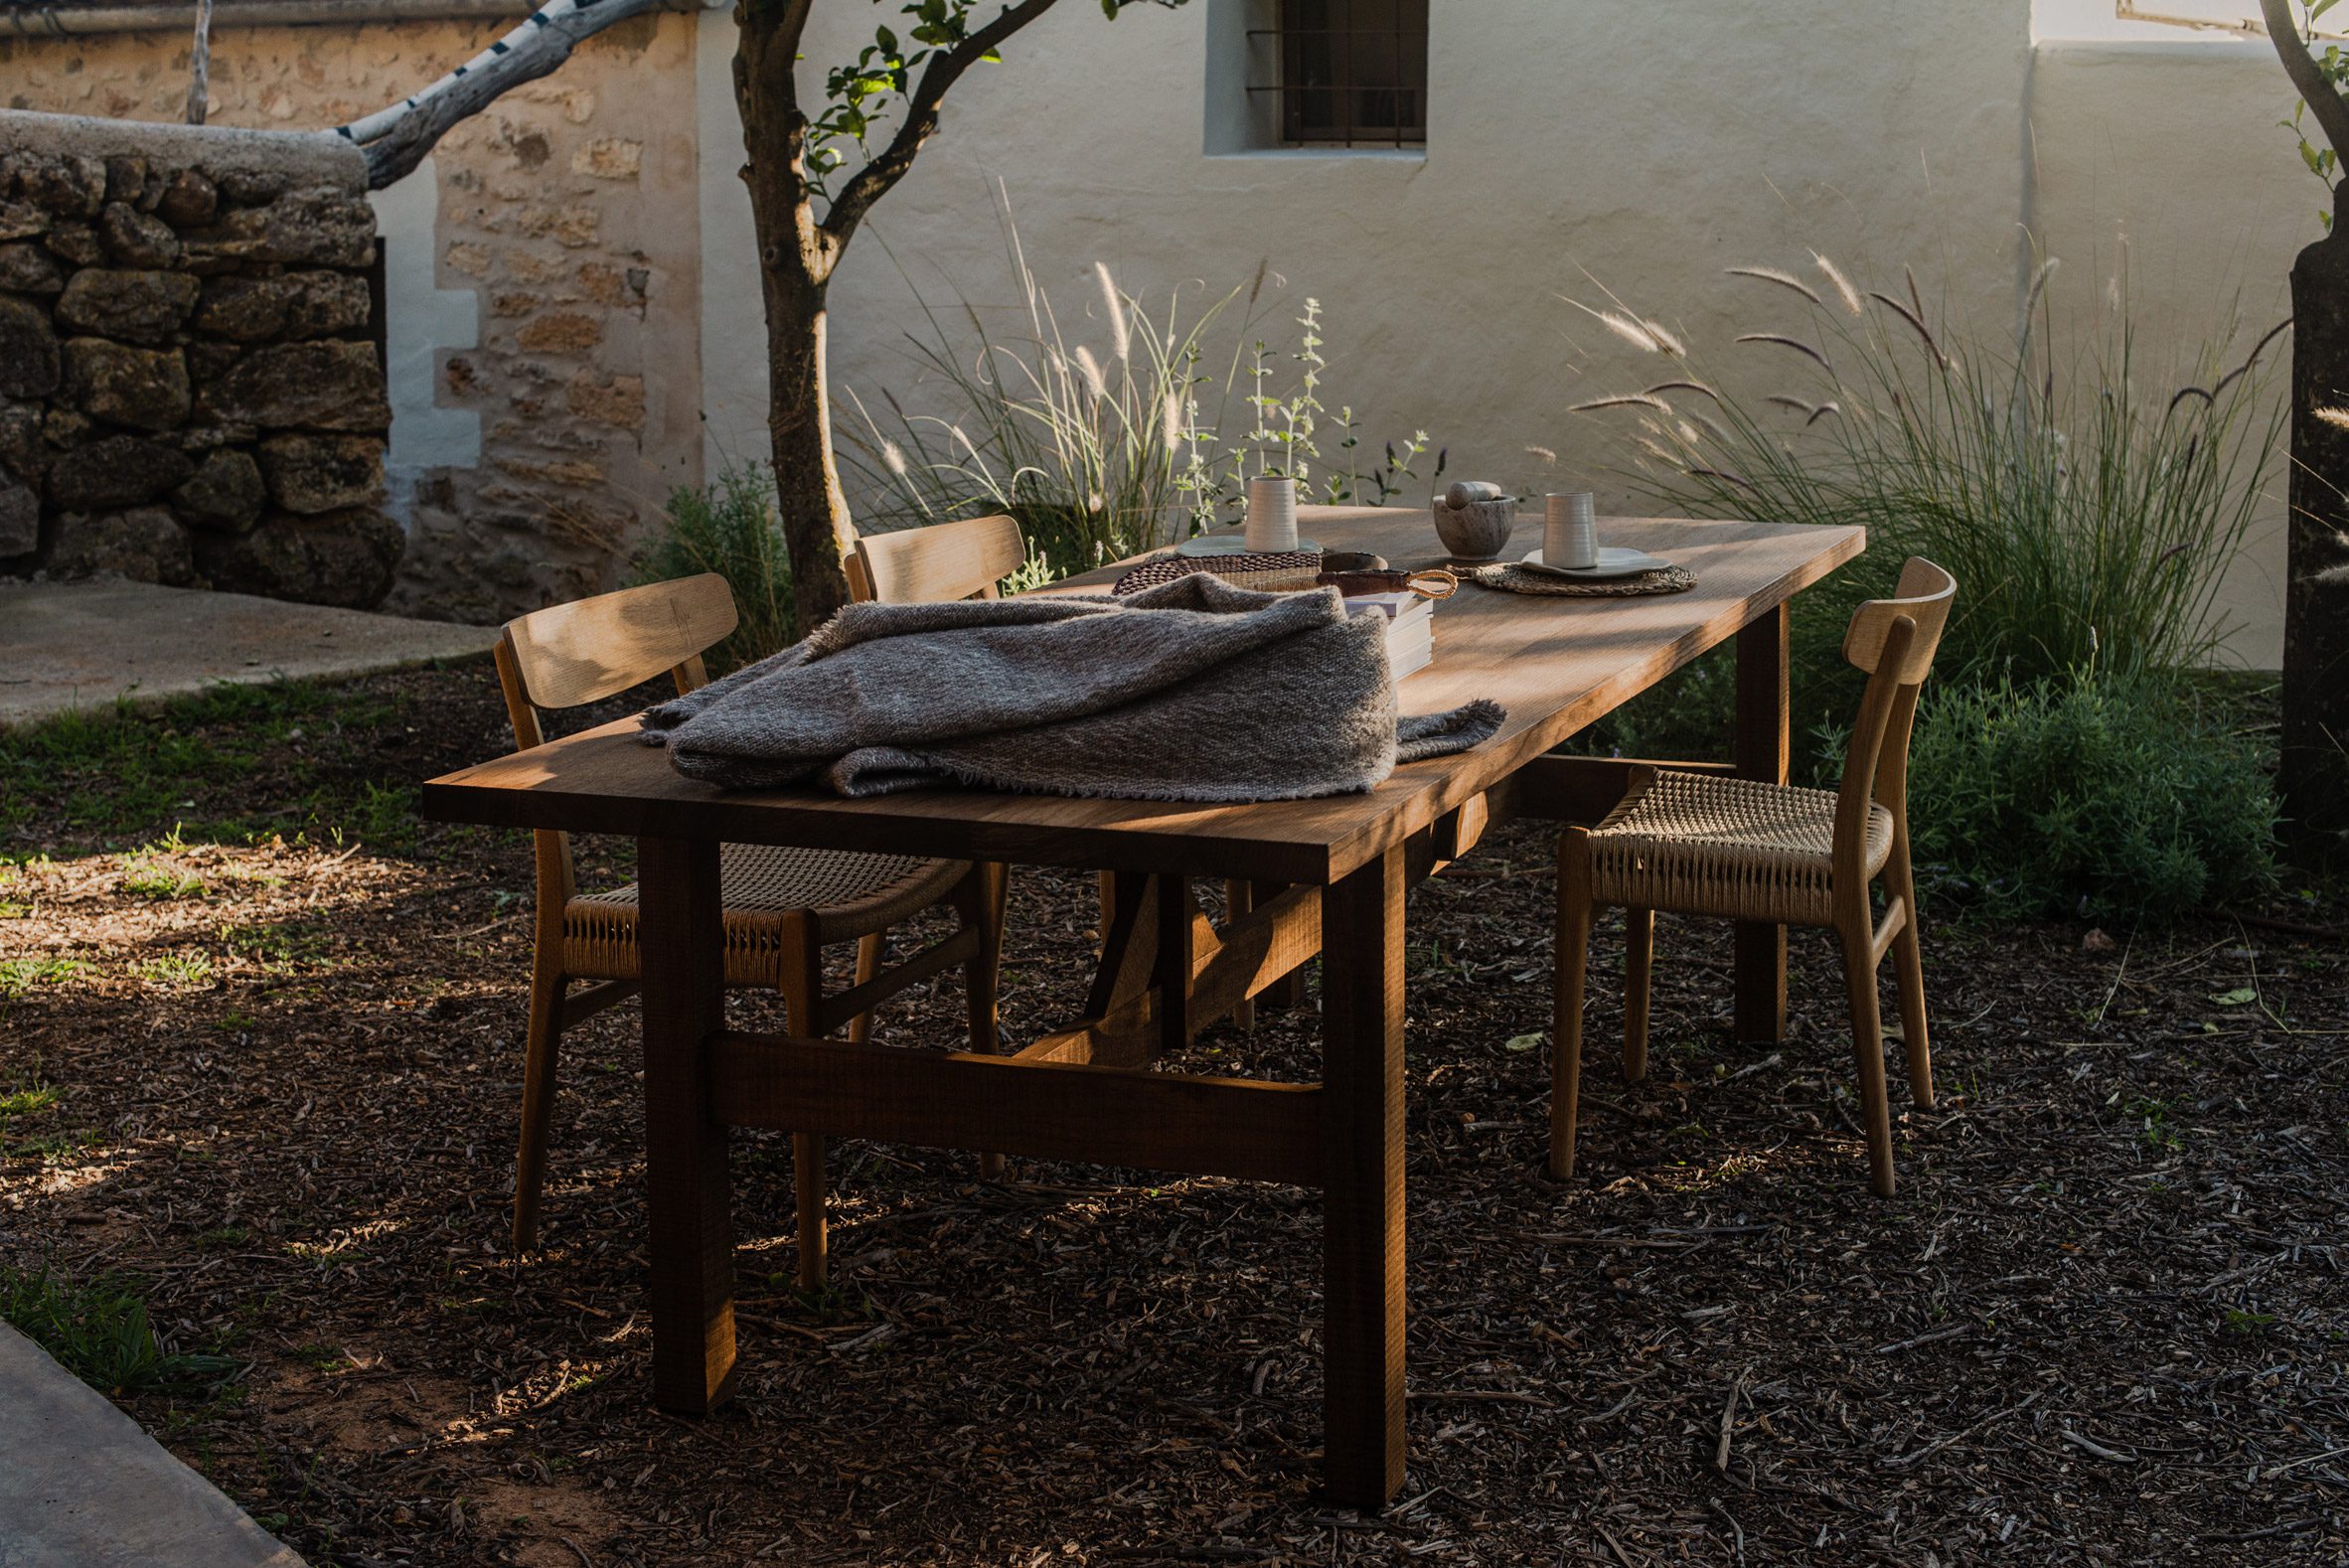 Wooden dining table outdoors